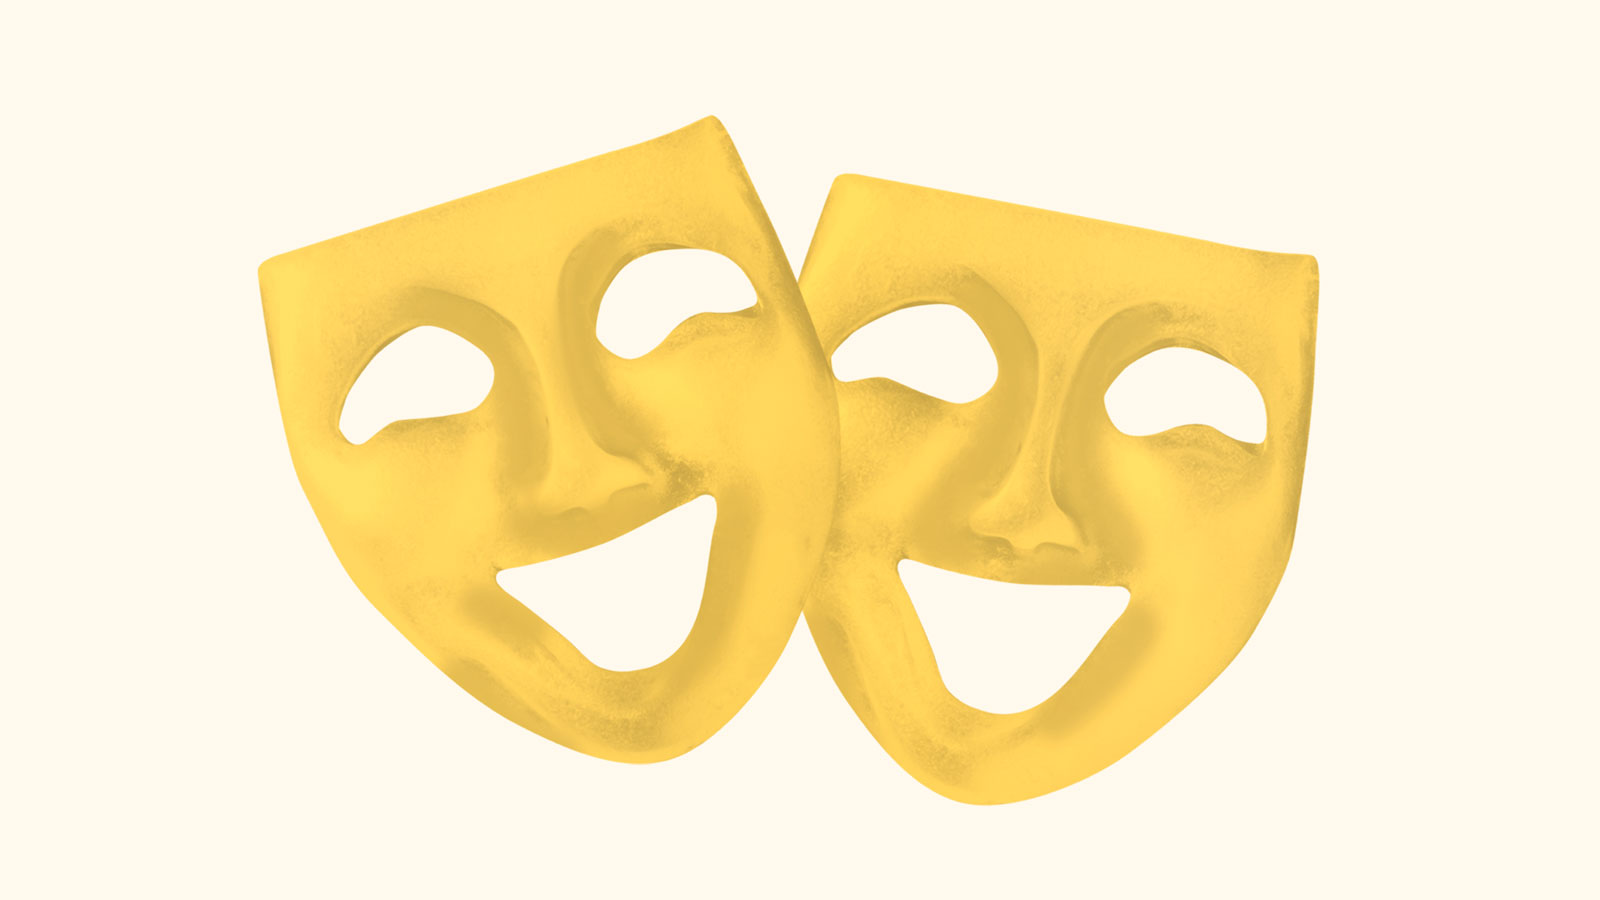 Conceptual illustration of yellow theater masks, both smiling